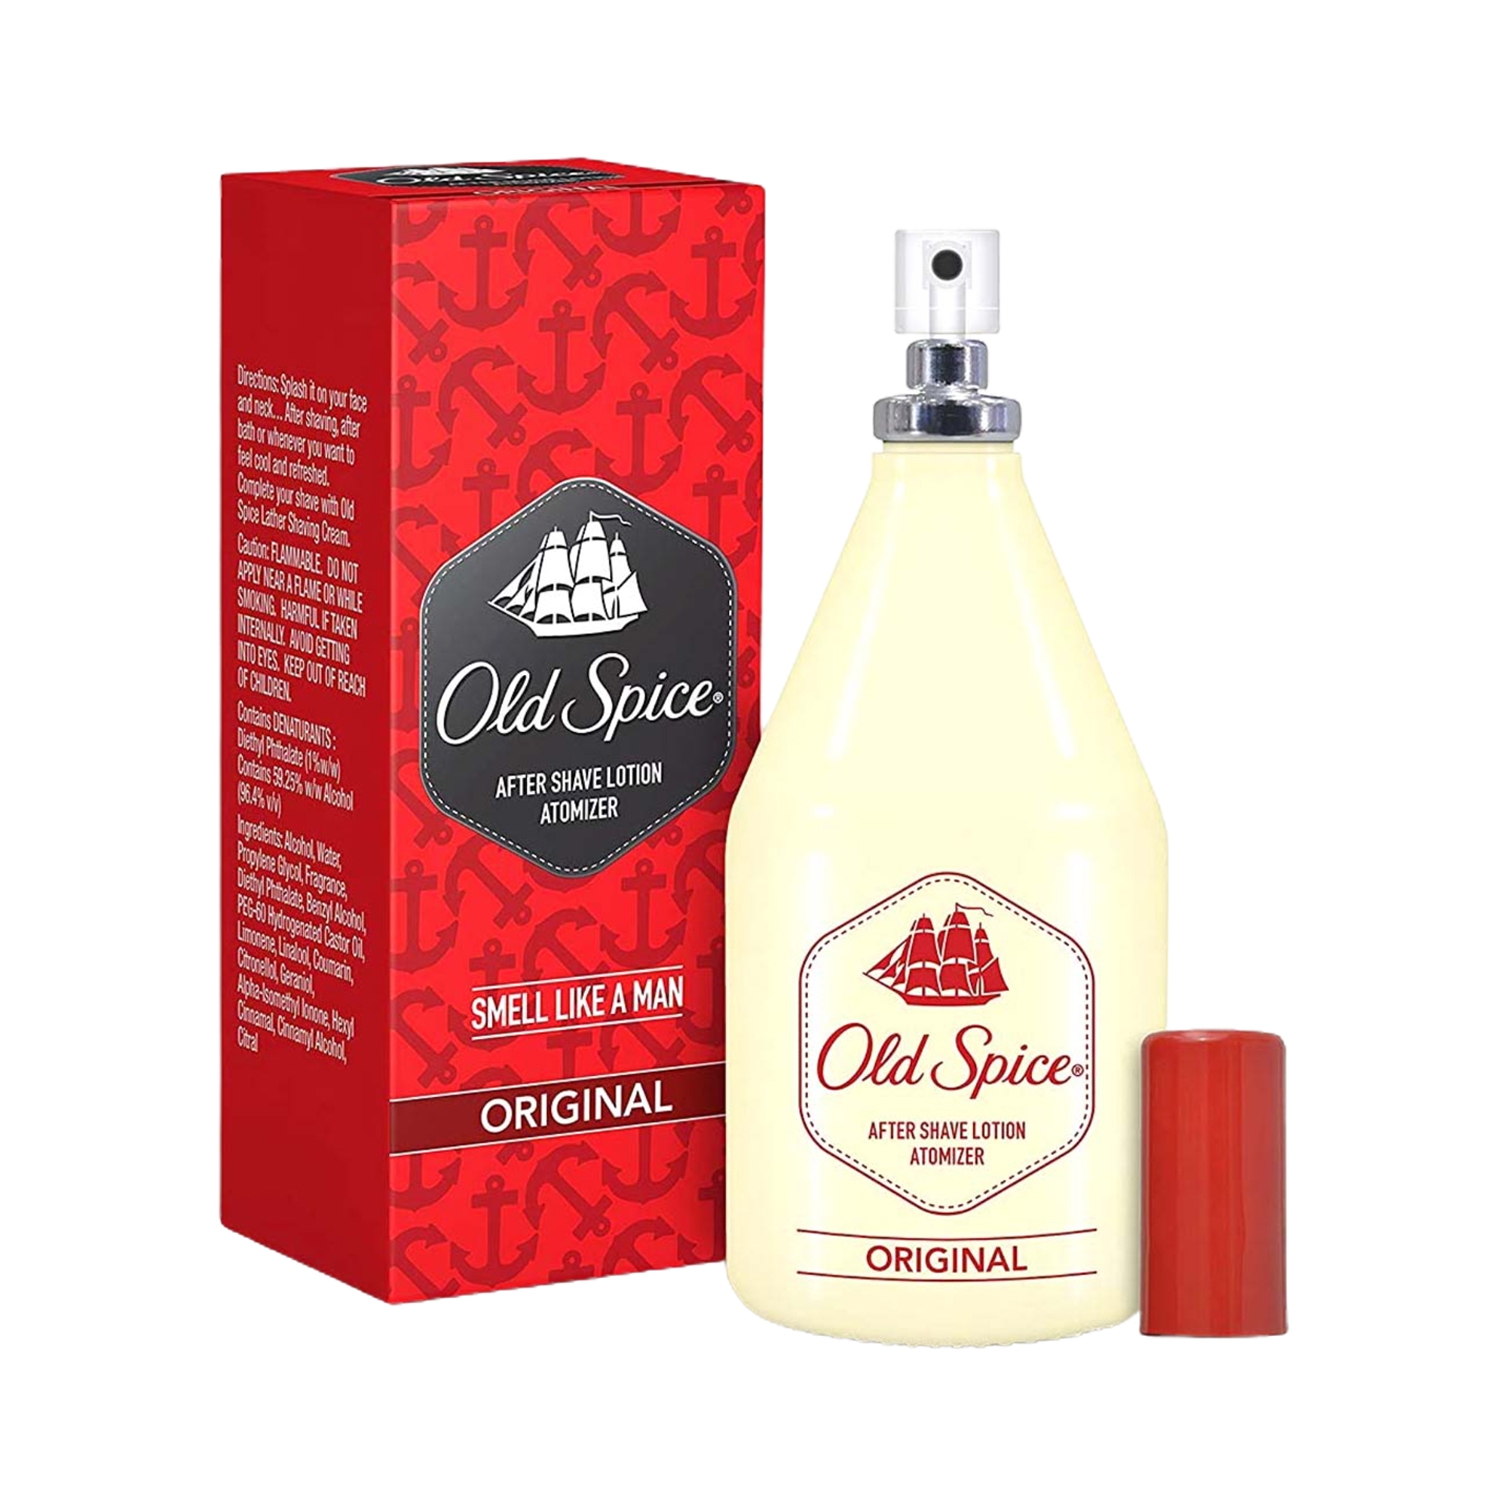 Old Spice | Old Spice Original After Shave Lotion (150ml)